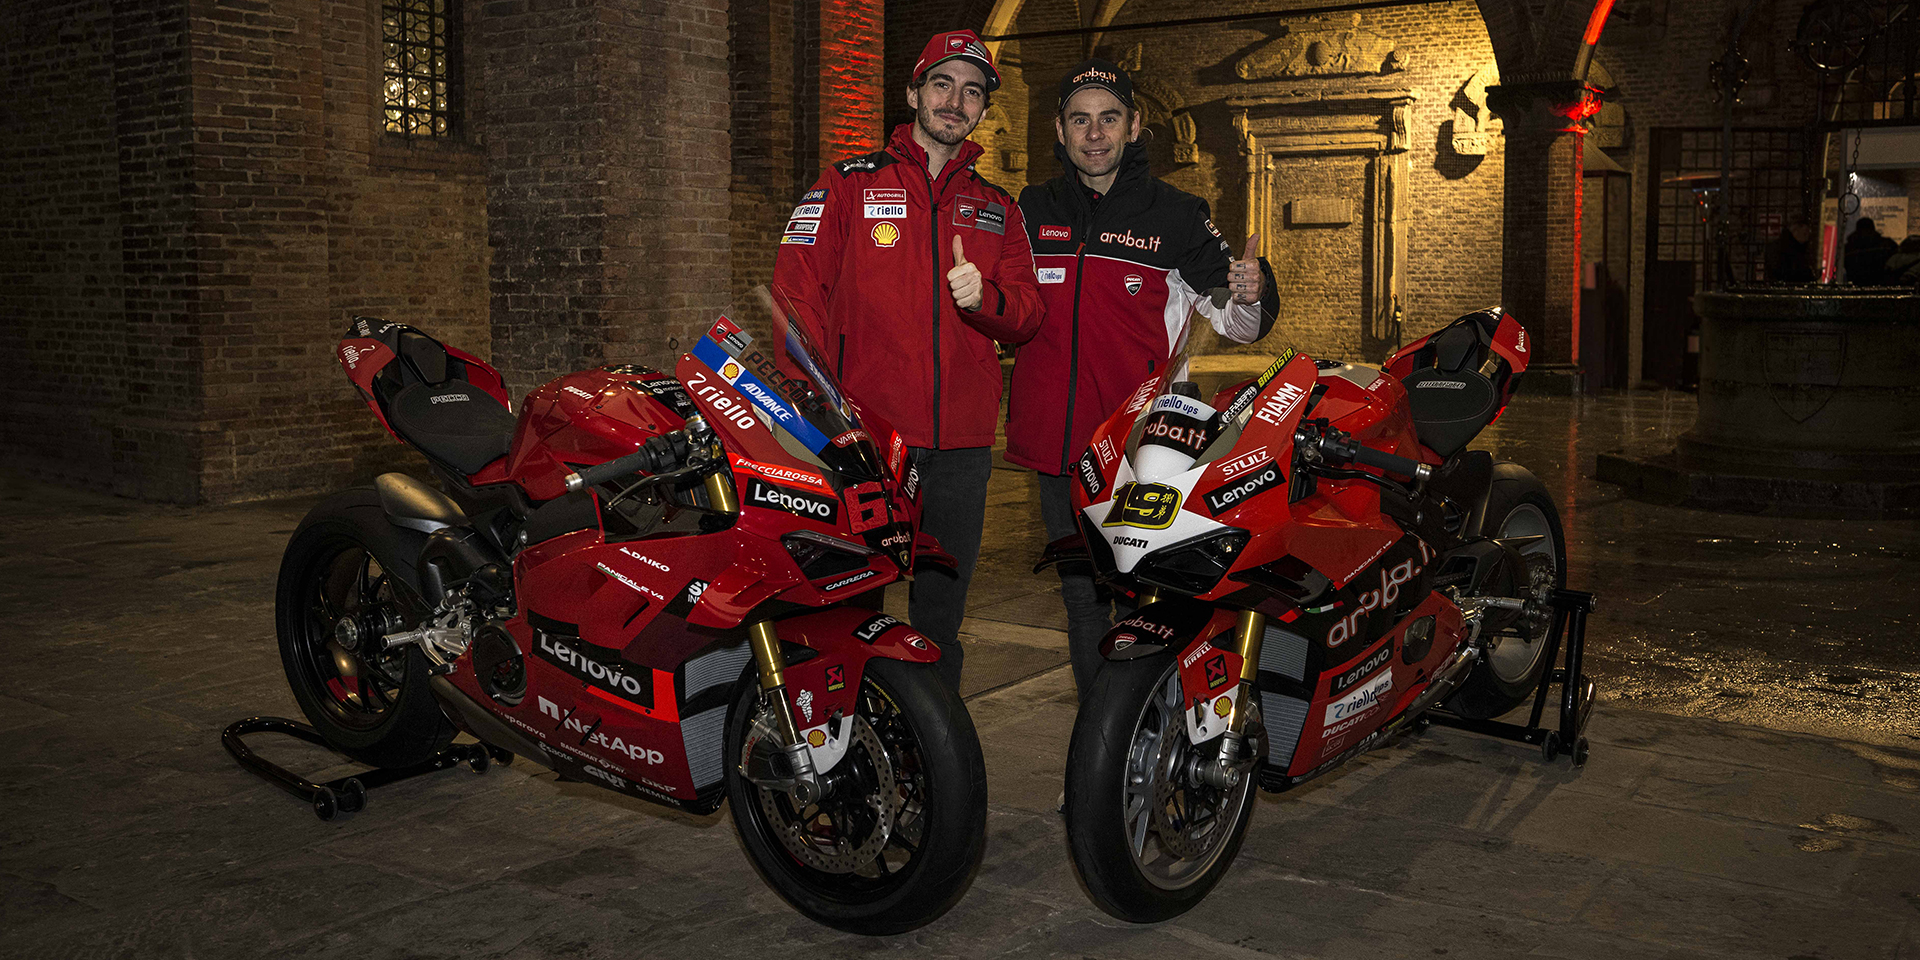 Two limited editions of Ducati Panigale V4 celebrate the world